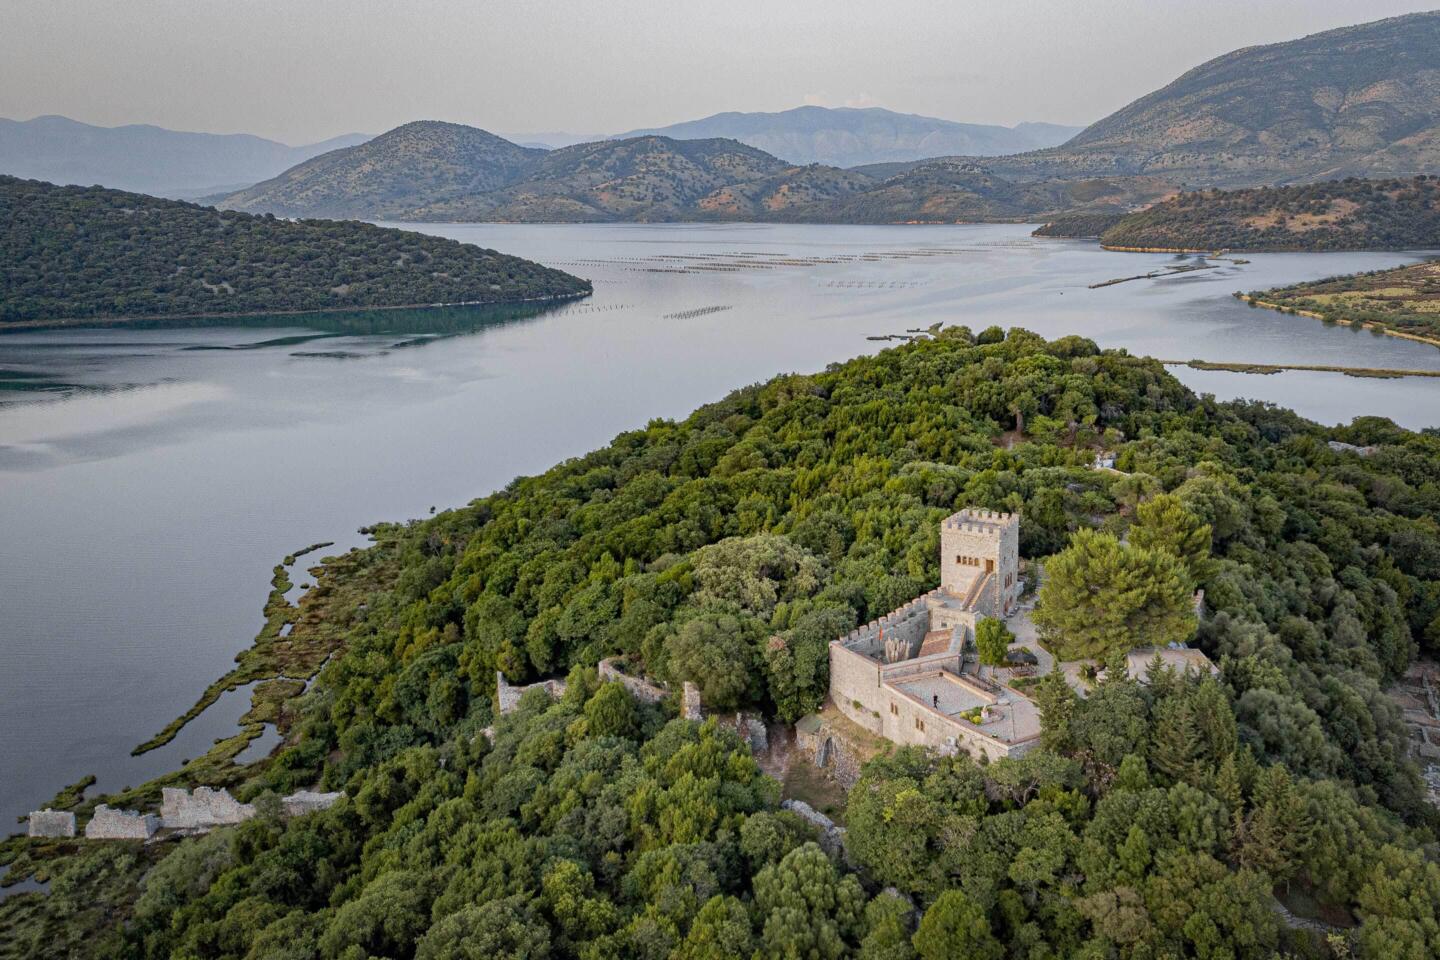 Butrint overview